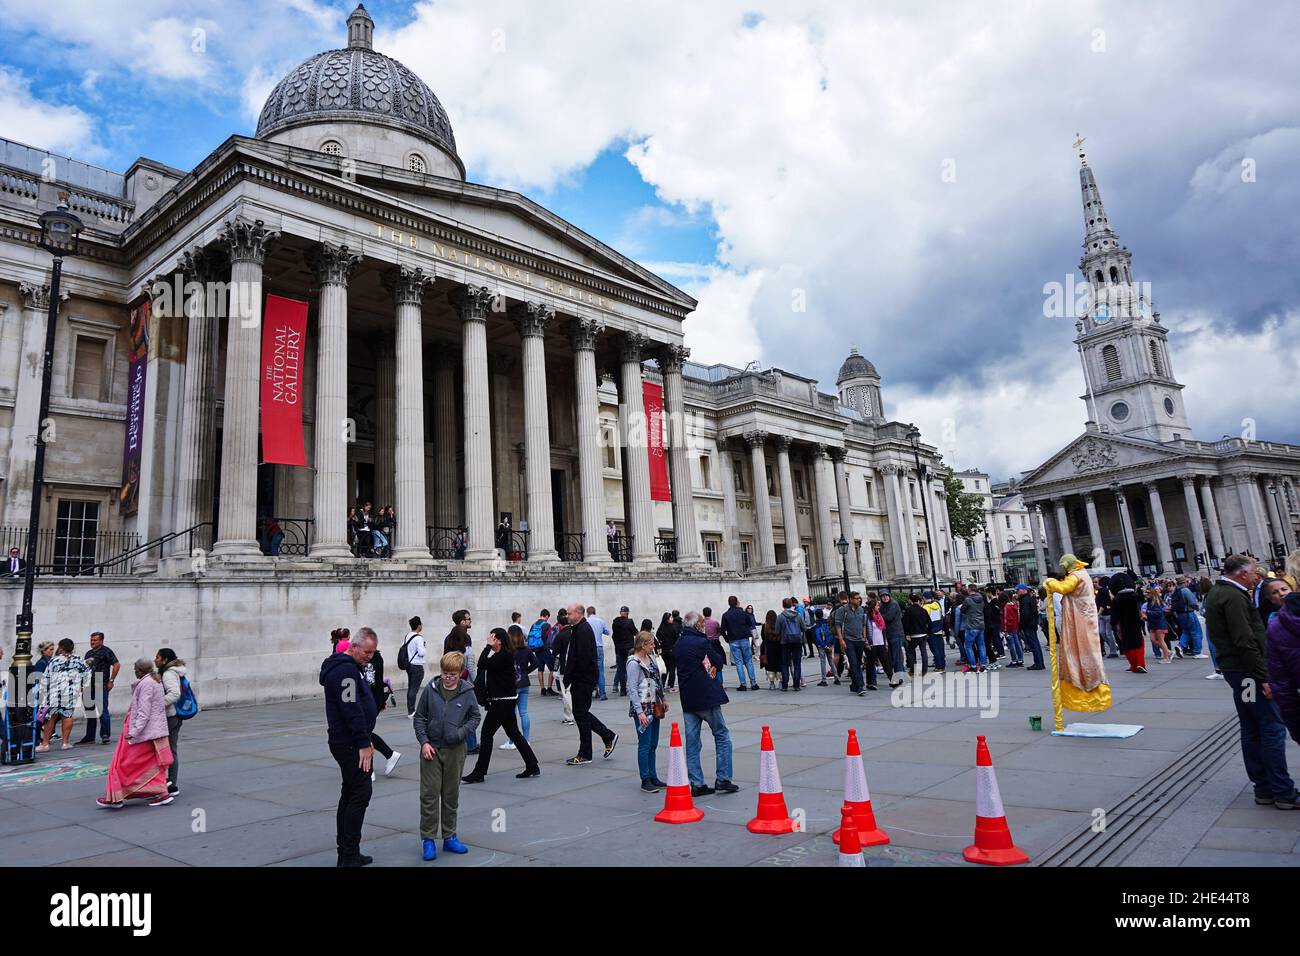 Tourists walking in front of the National Gallery, art museum in Trafalgar Square, Westminster Stock Photo